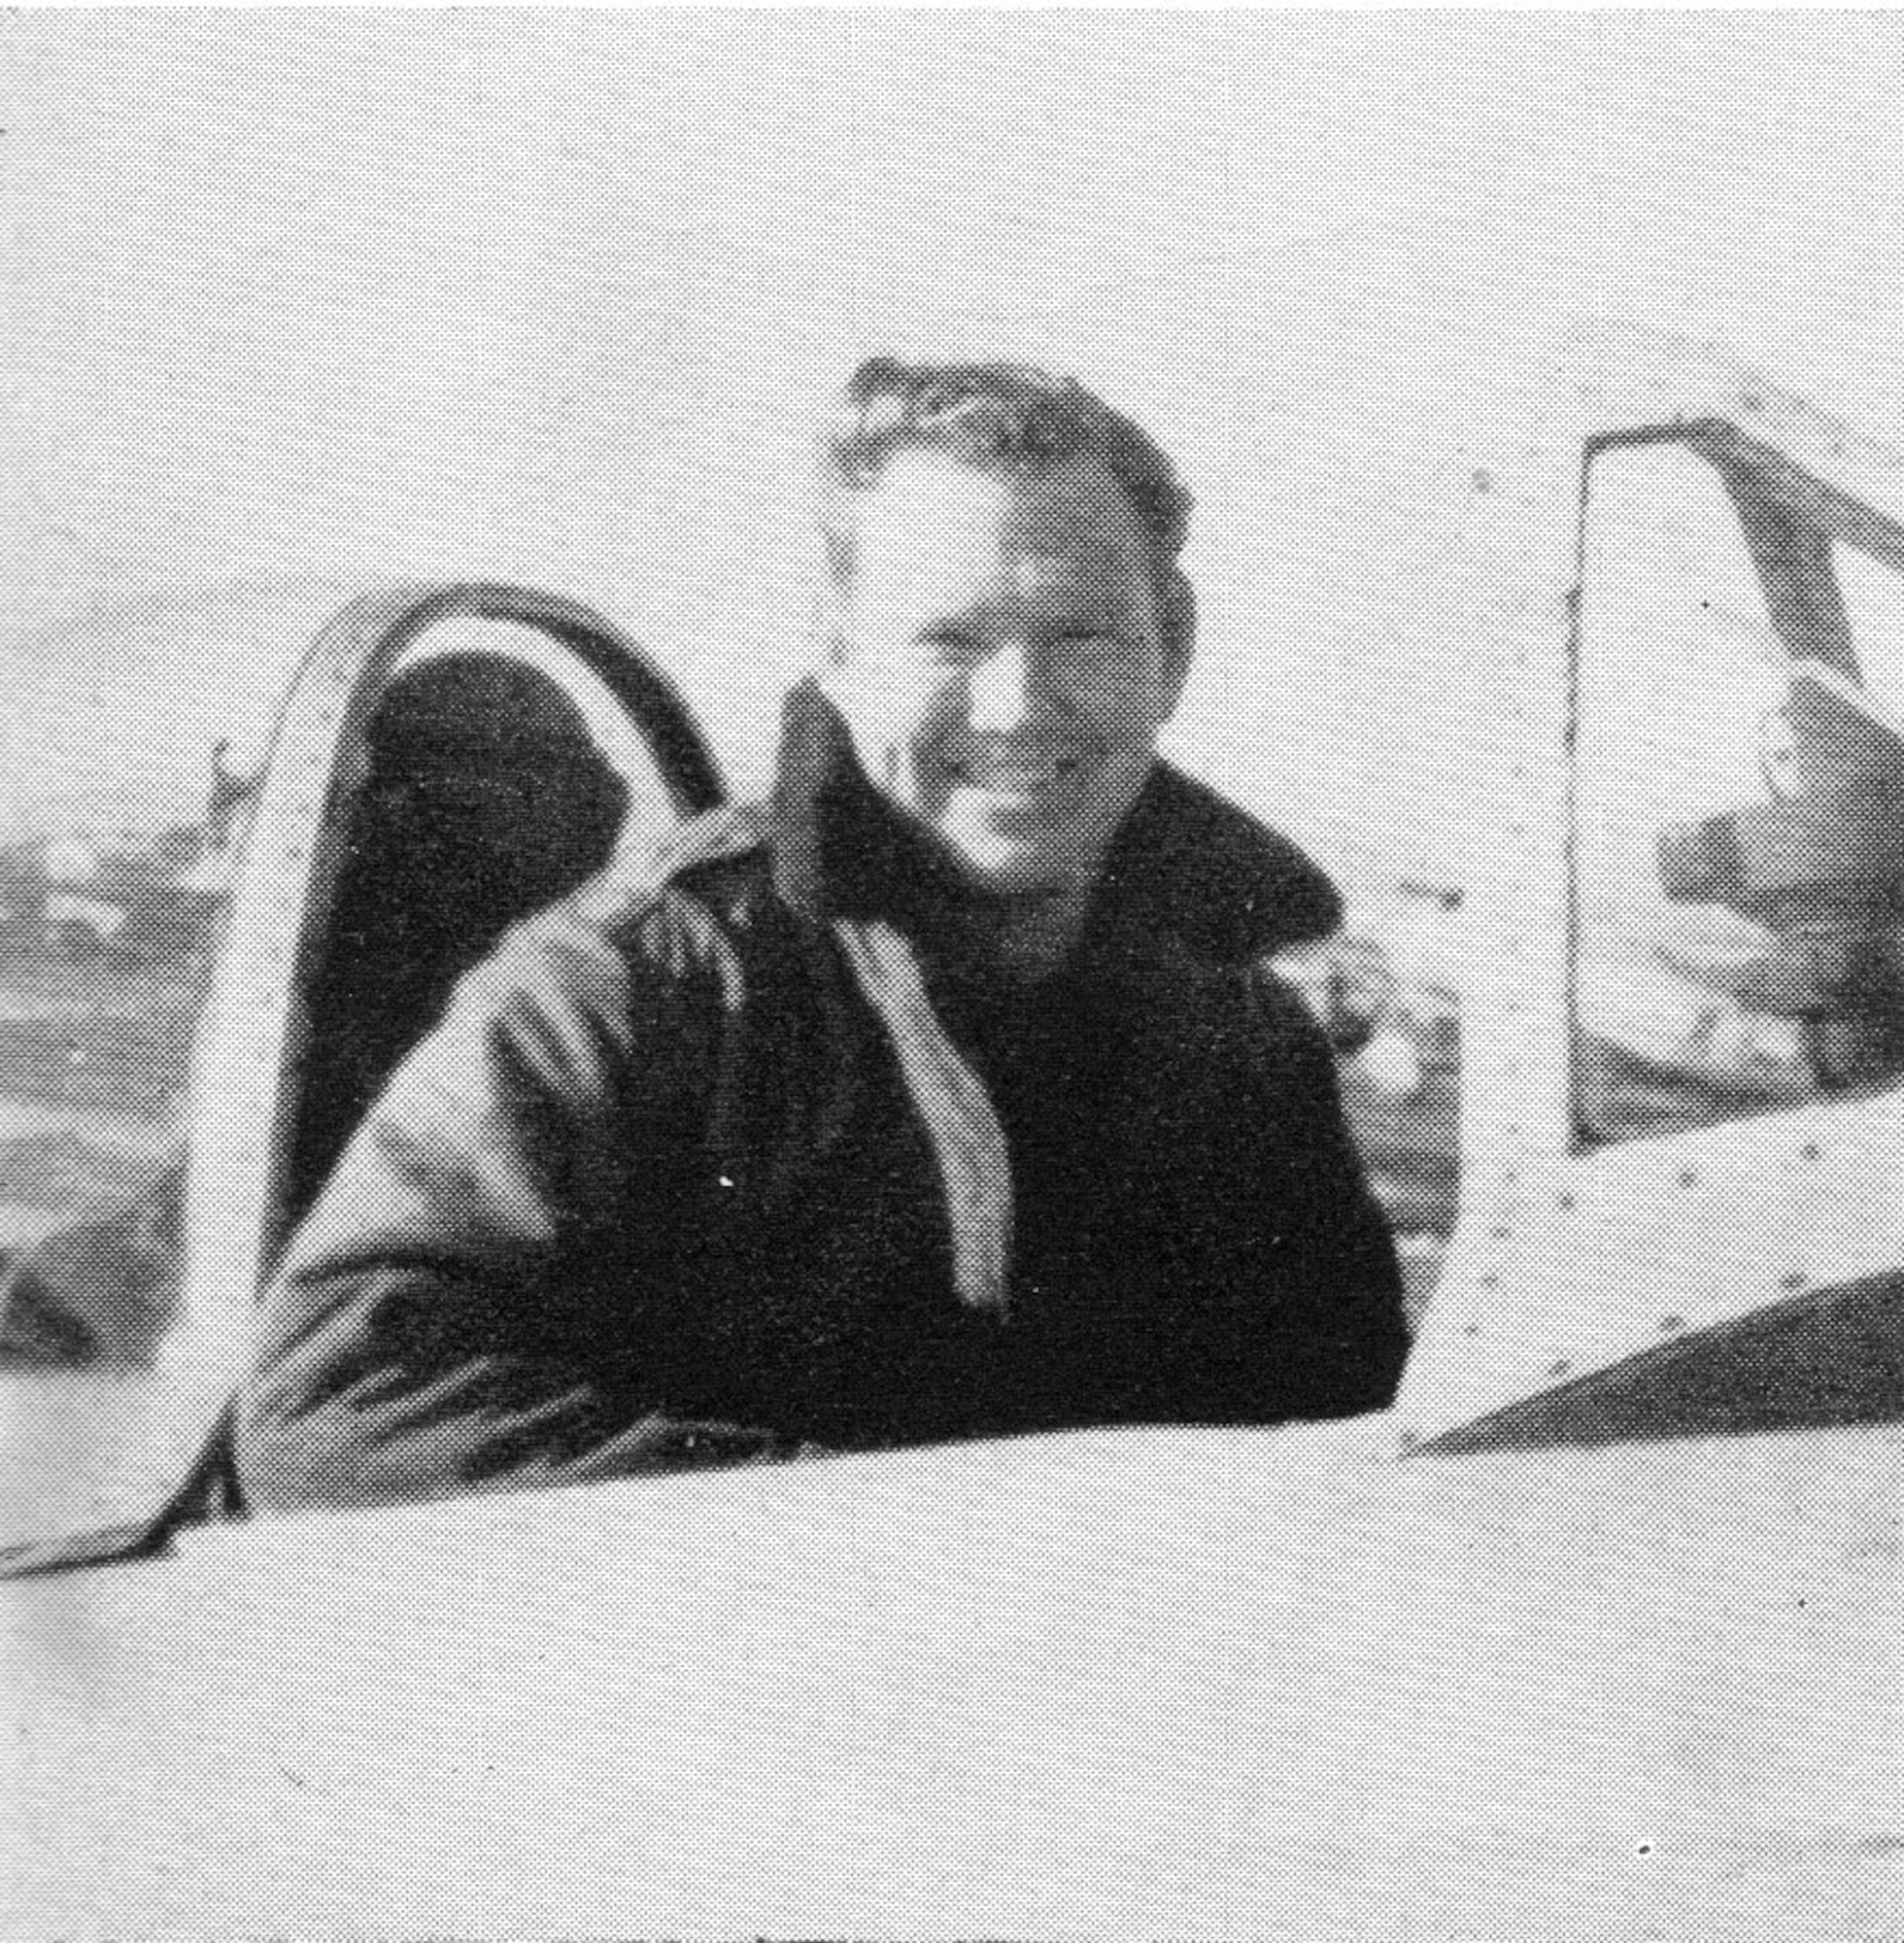 405th Fighter Squadron Commander and leader on both D-Day missions was Major Harvey L. Case, Jr.  He led the squadron from July, 1943, to September, 1944.  (Courtesy “The 371st Fighter Group in the E.T.O.” via 406FS P-47 Pilot Francis E. Madore)